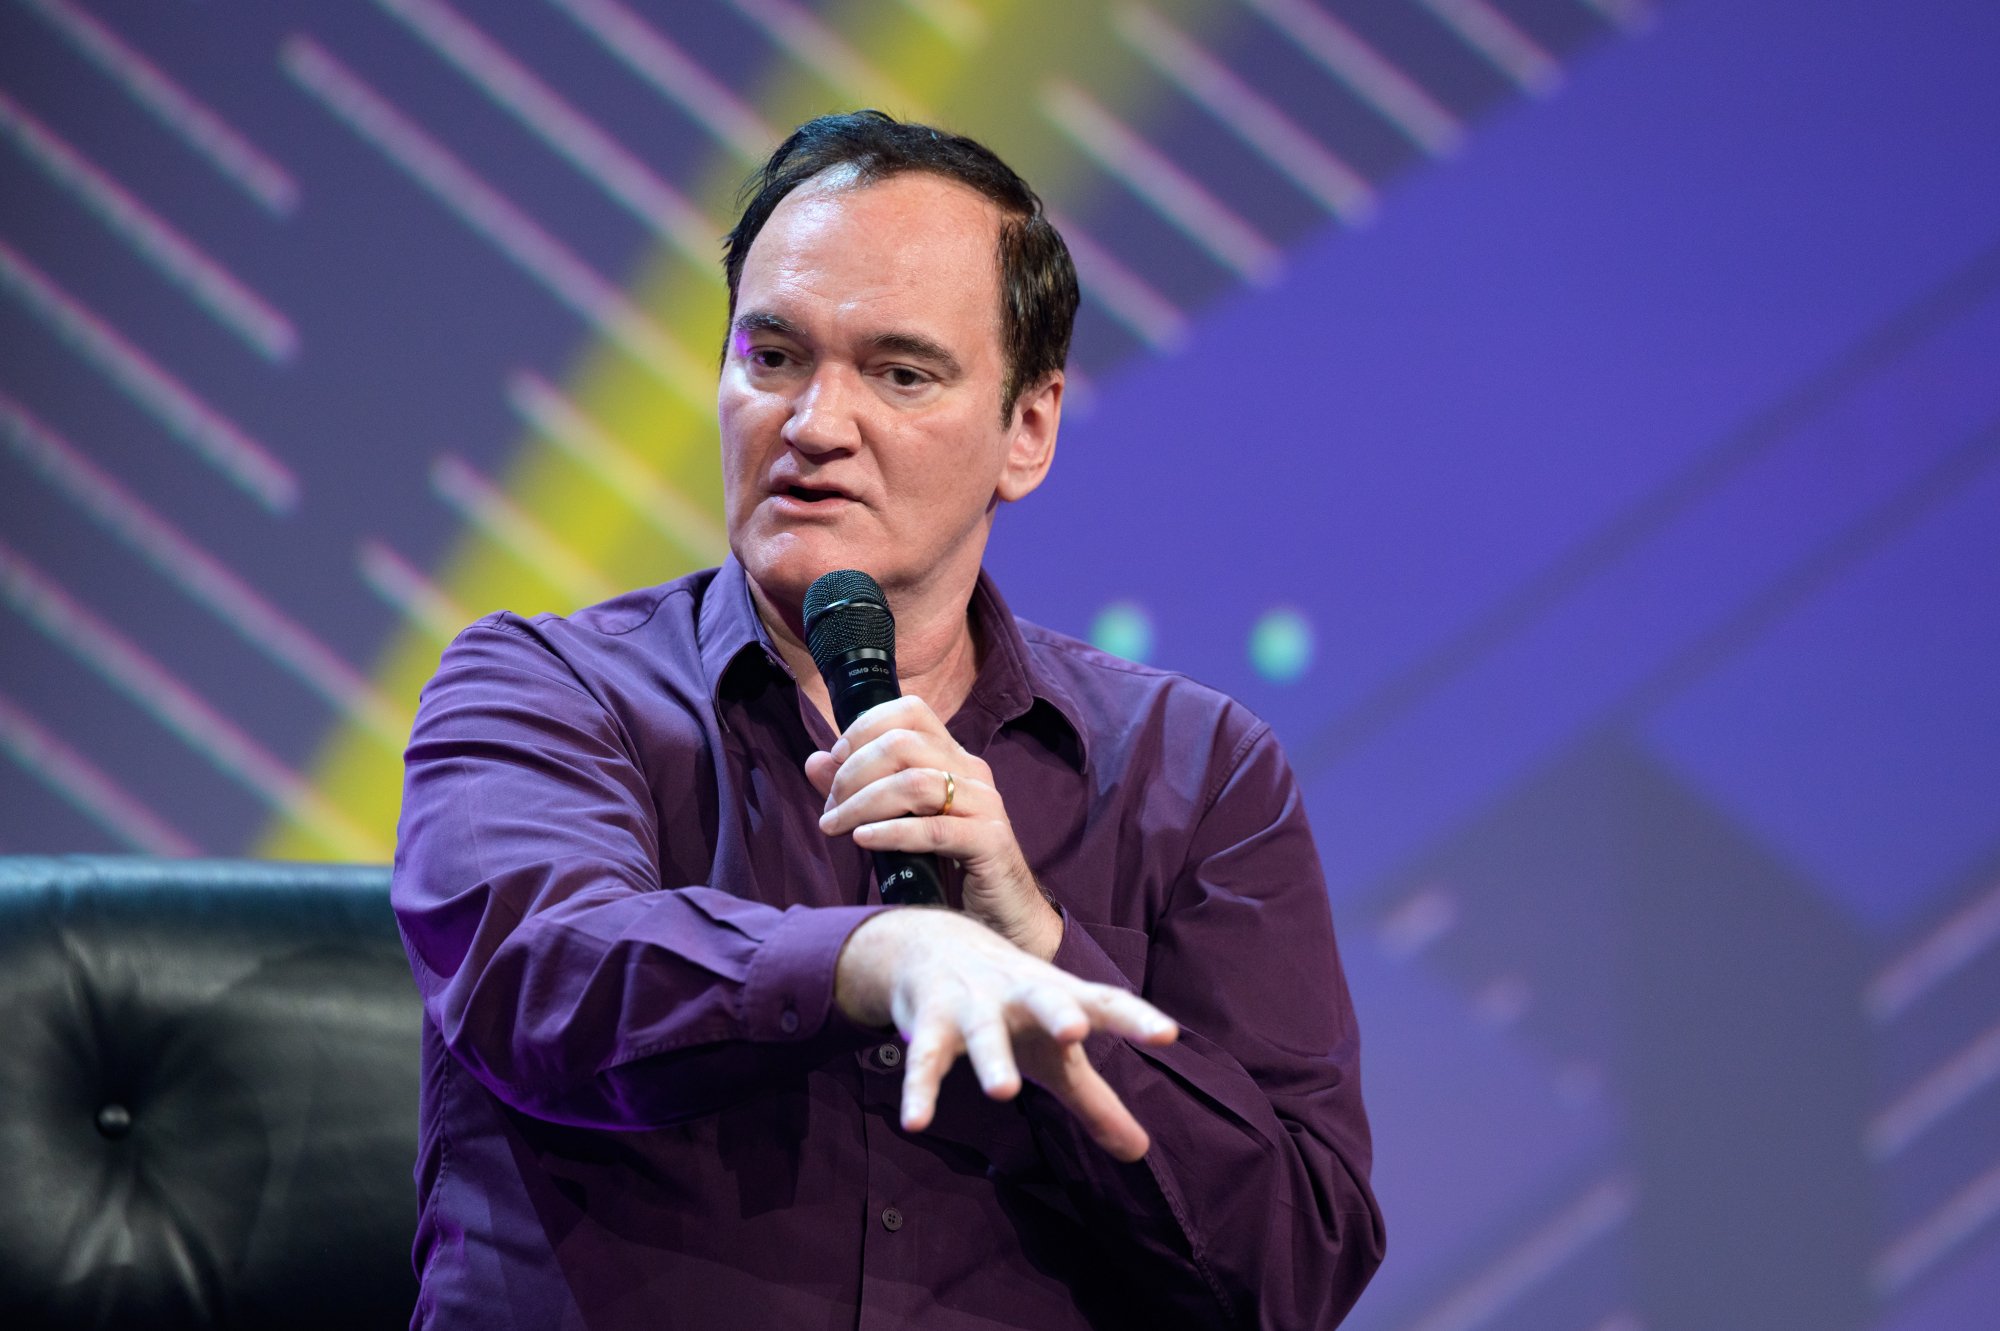 Quentin Tarantino, who loved 'Top Gun: Maverick'. He's wearing a purple collared shirt and talking into a microphone.